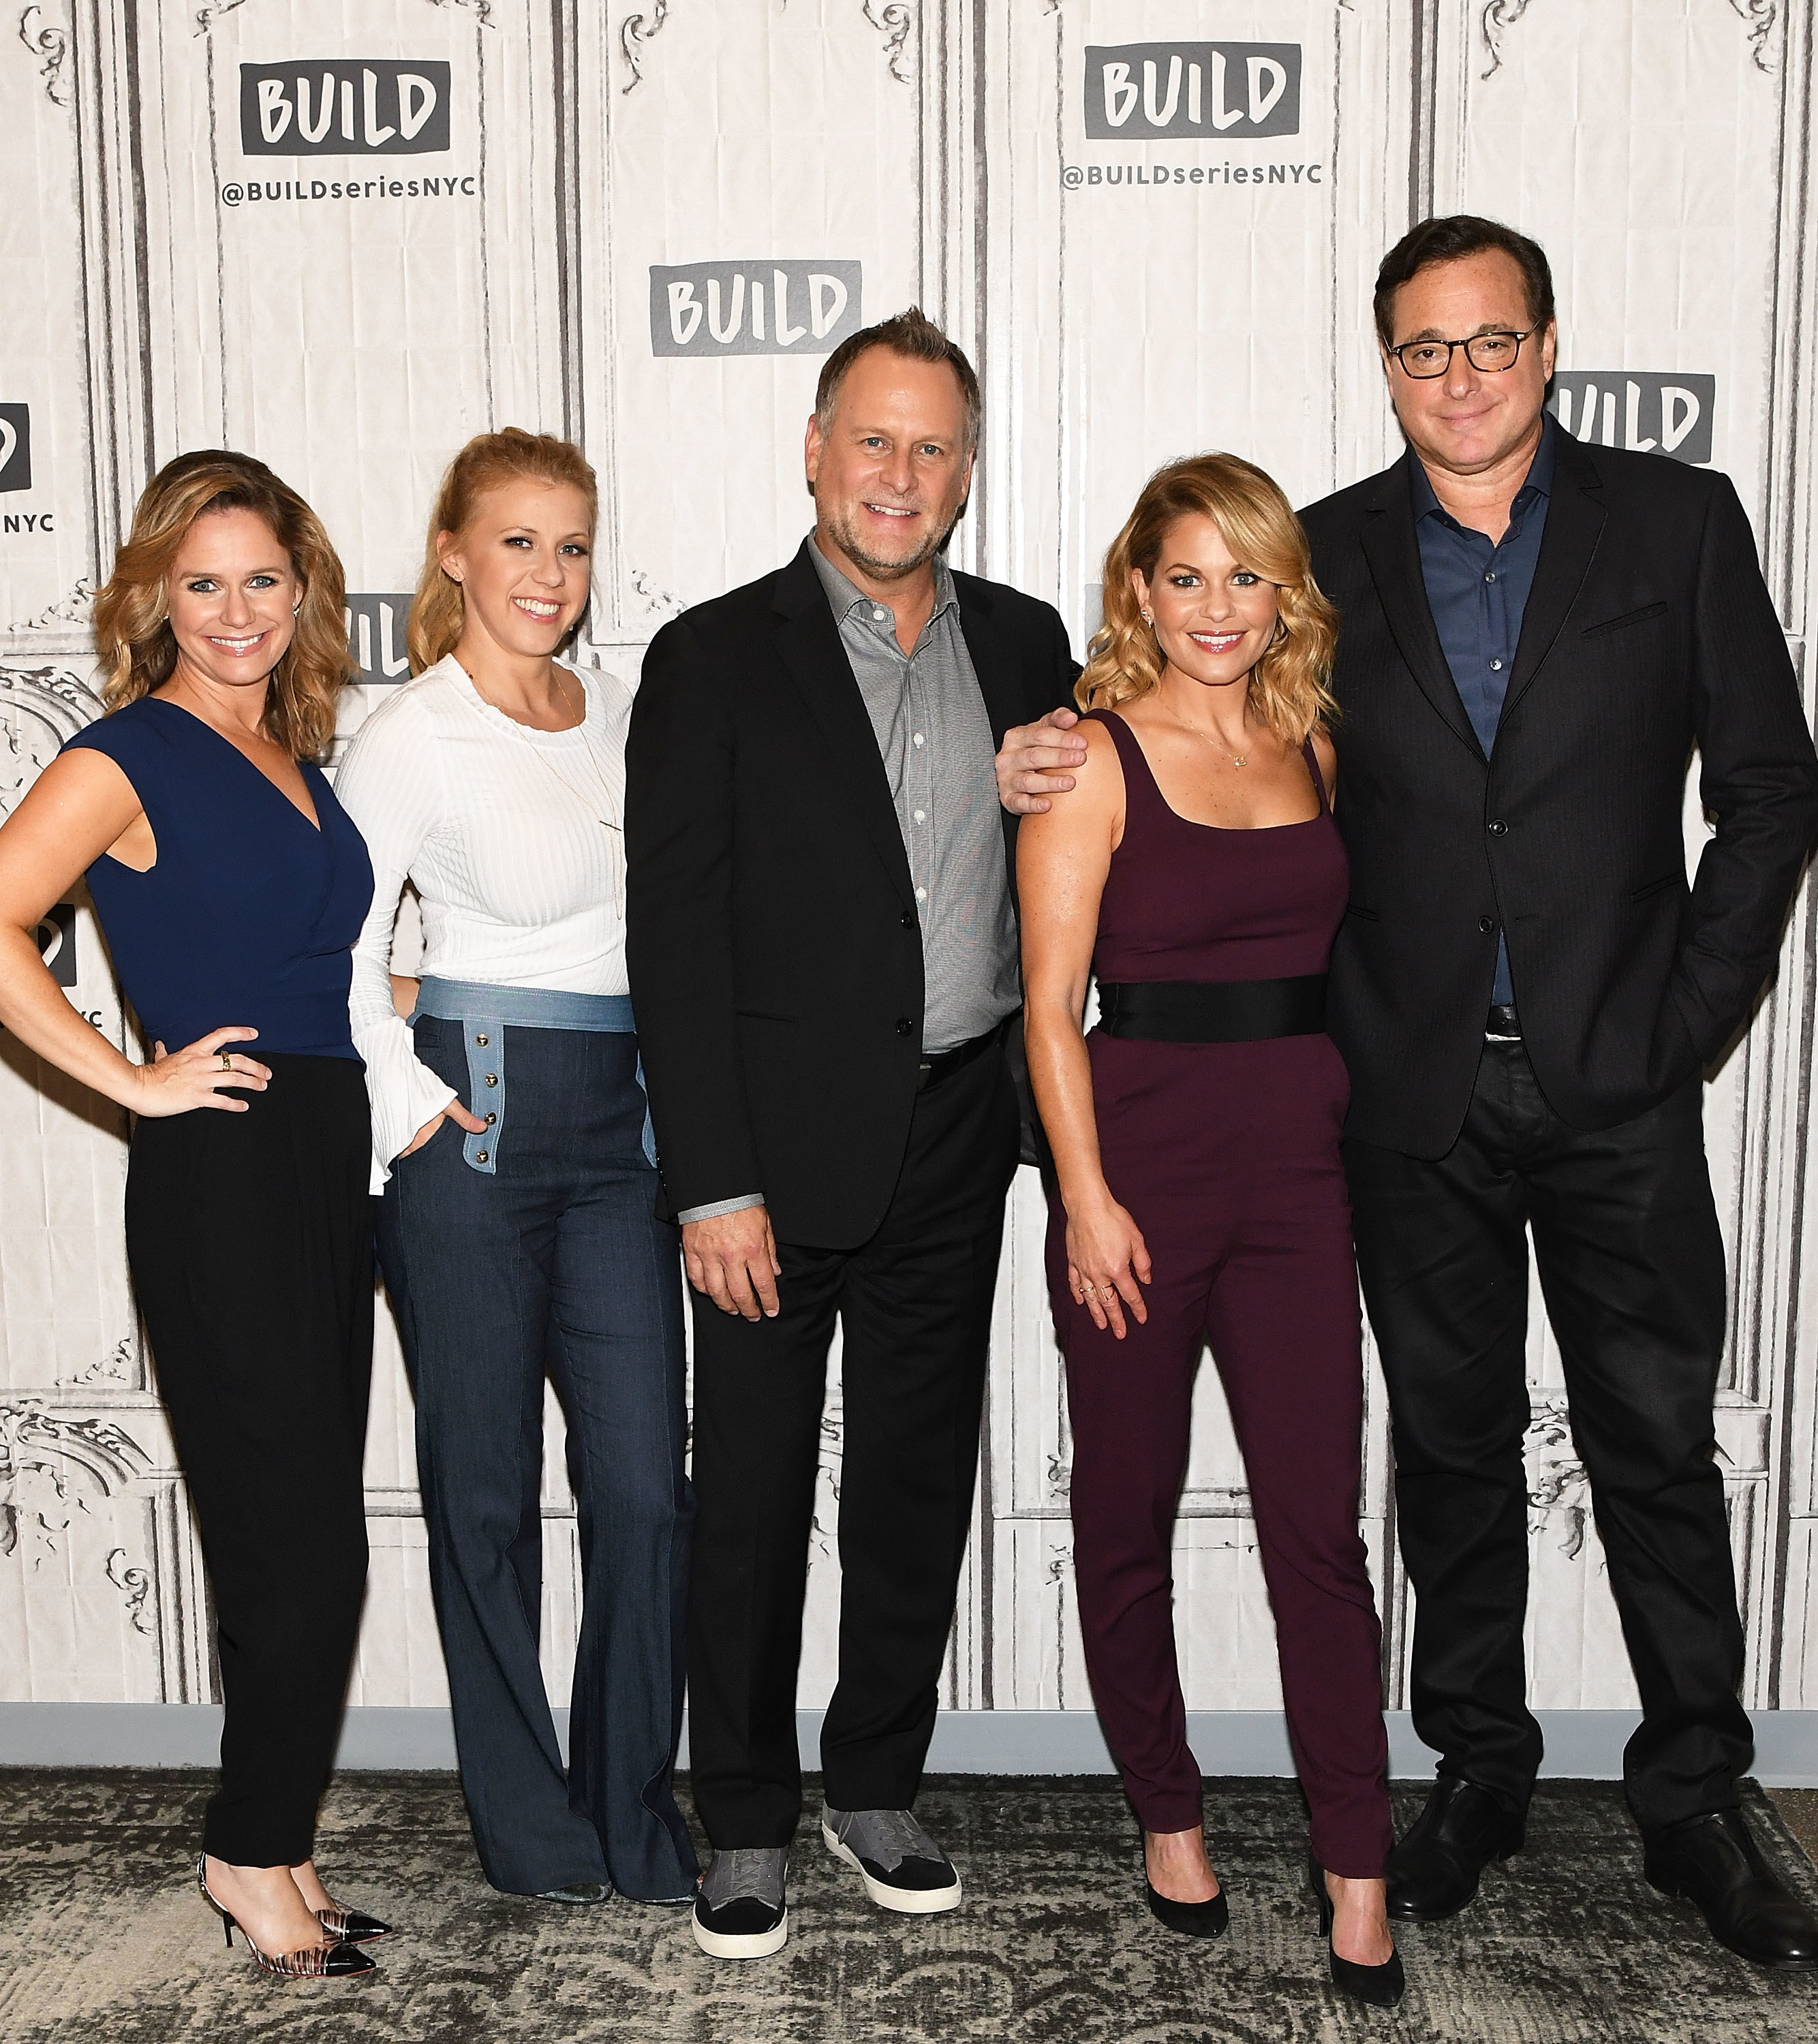 The cast of Fuller House at a step-and-repeat